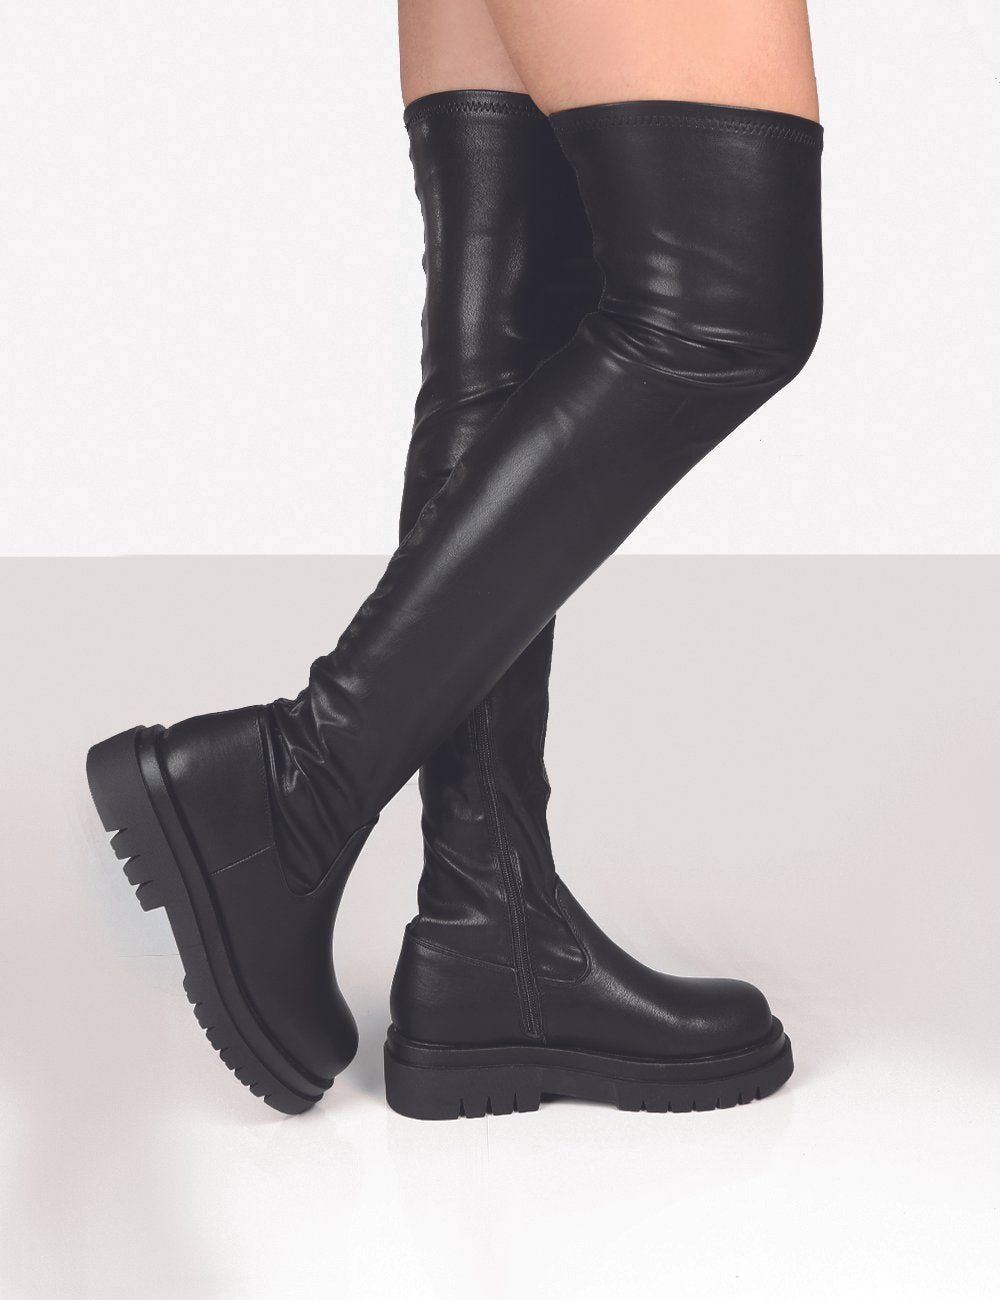 Wenkouban Platform Chunky Heel Zipper Ladies Thigh High Boots Fashion Comfy Black Design Casual Over The Knee Boots For Women